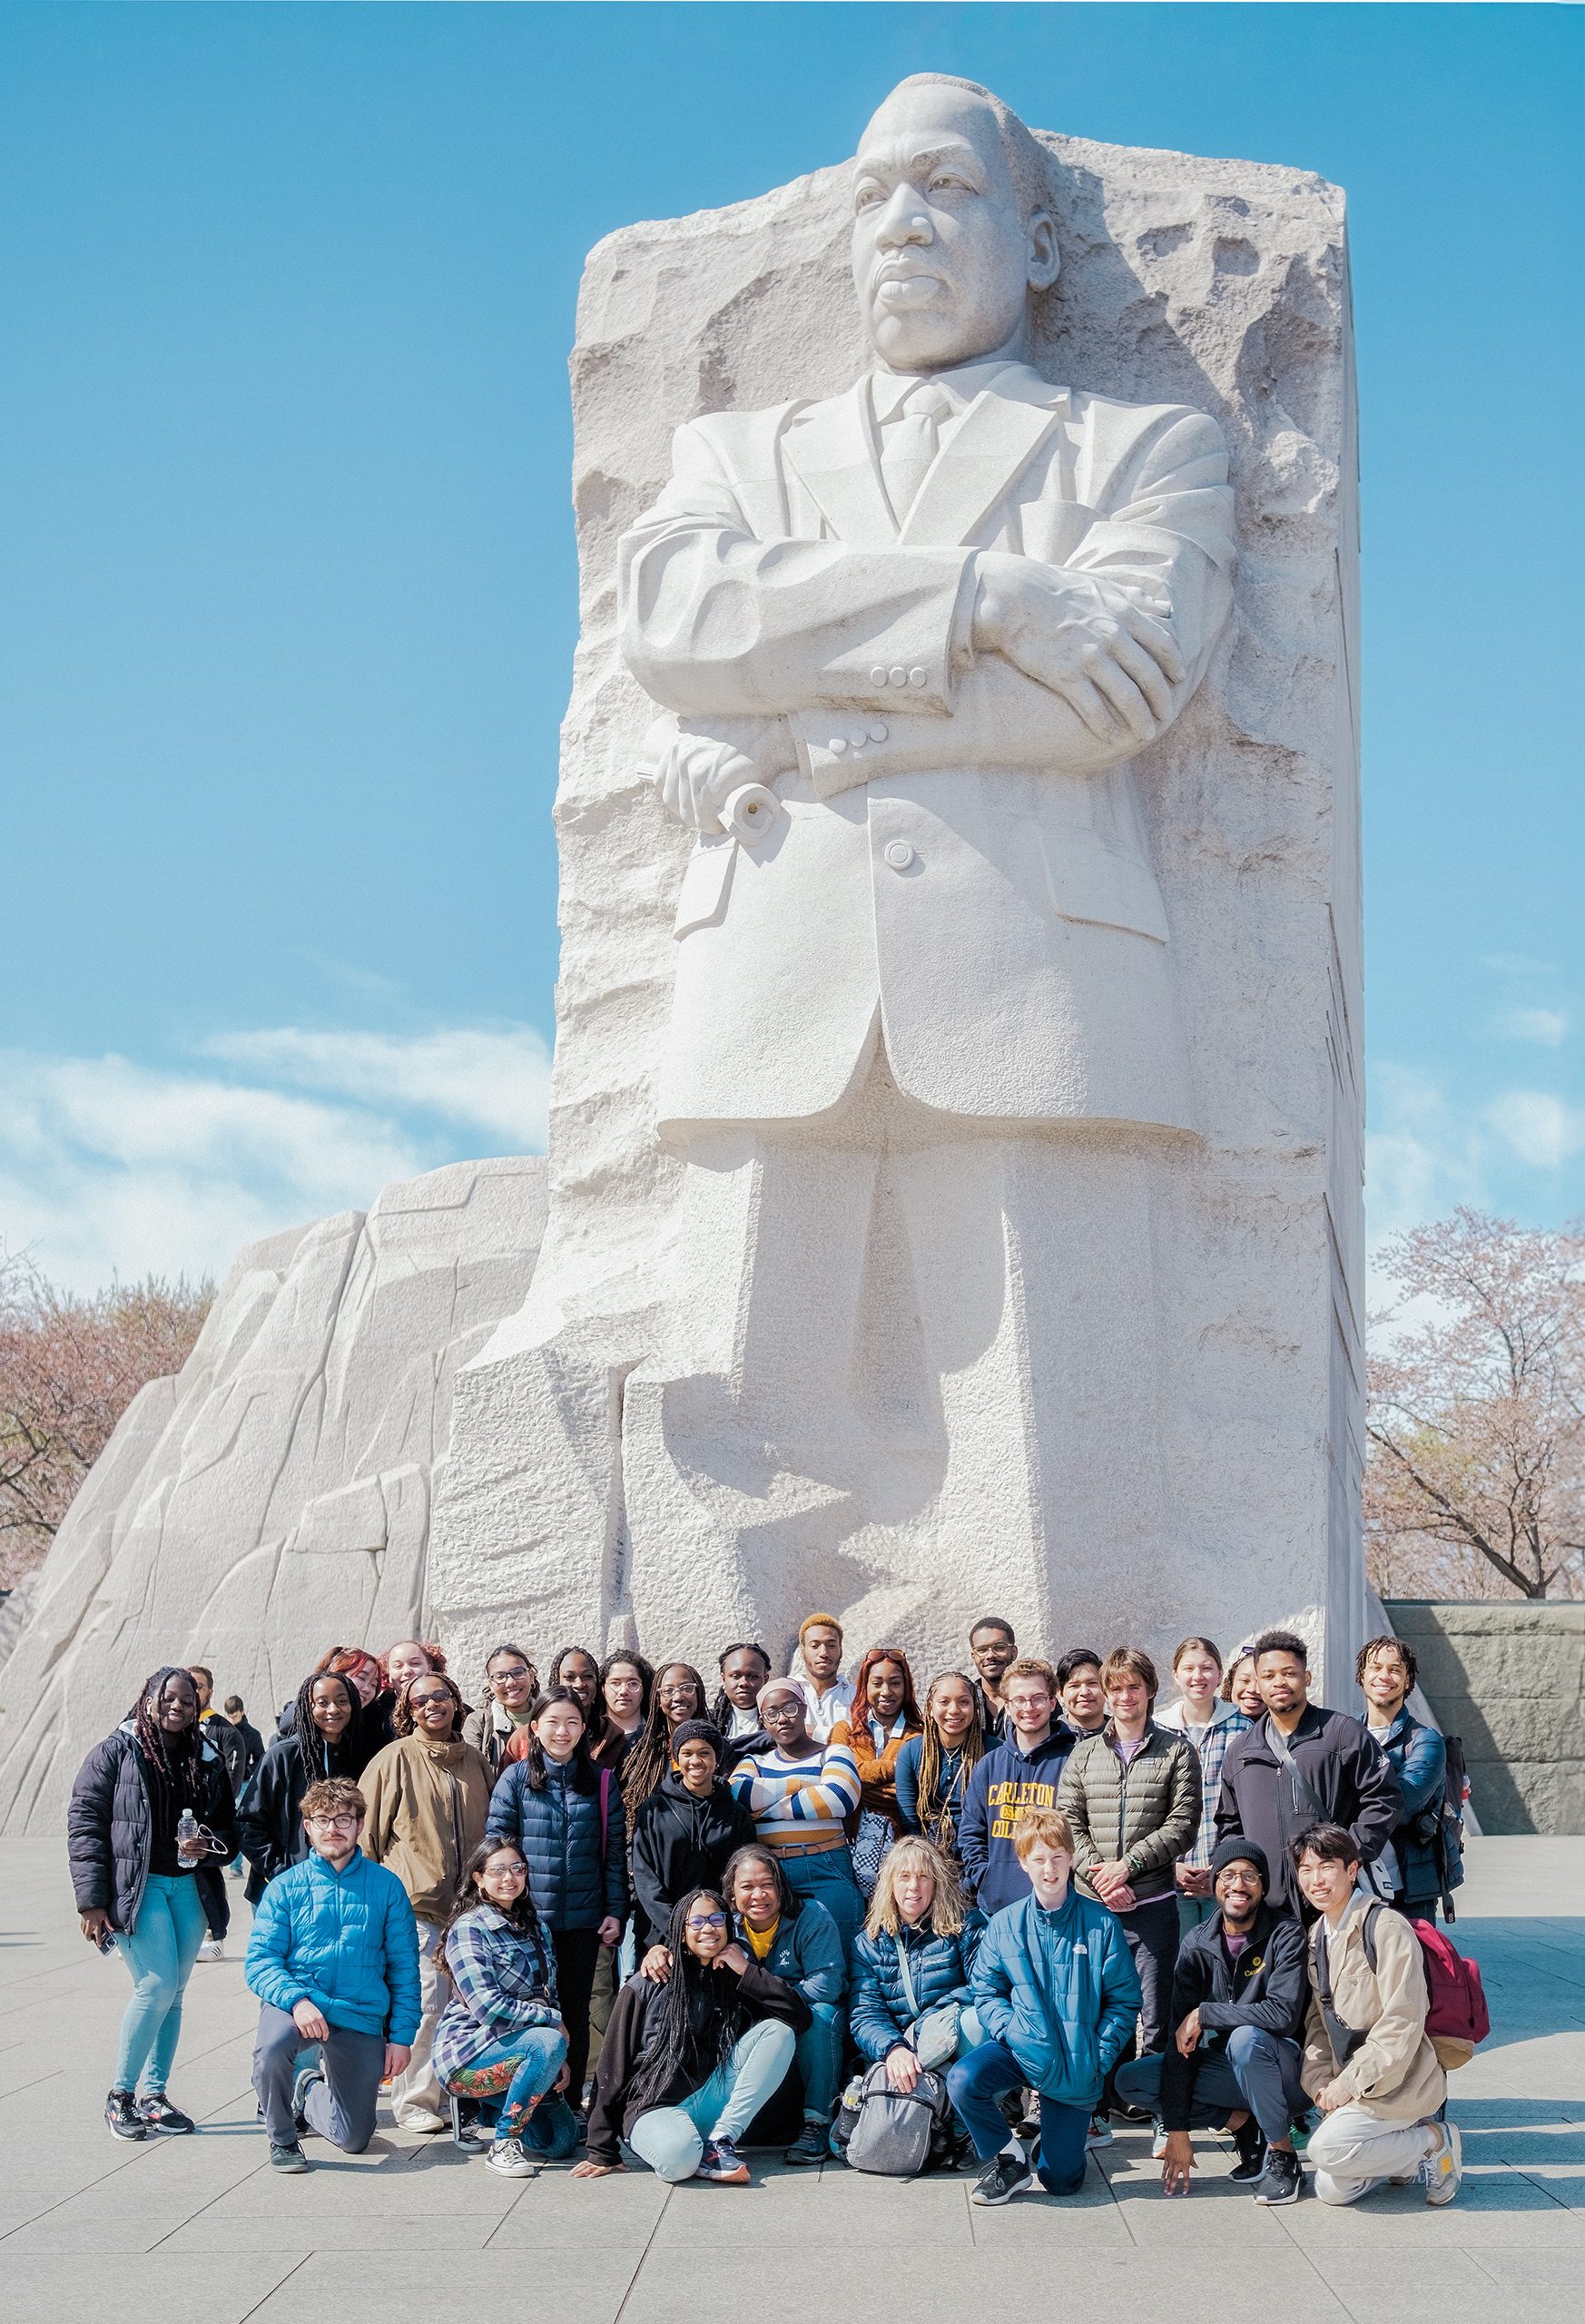 The group visits the Martin Luther King, Jr. National Memorial in Washington, D.C.